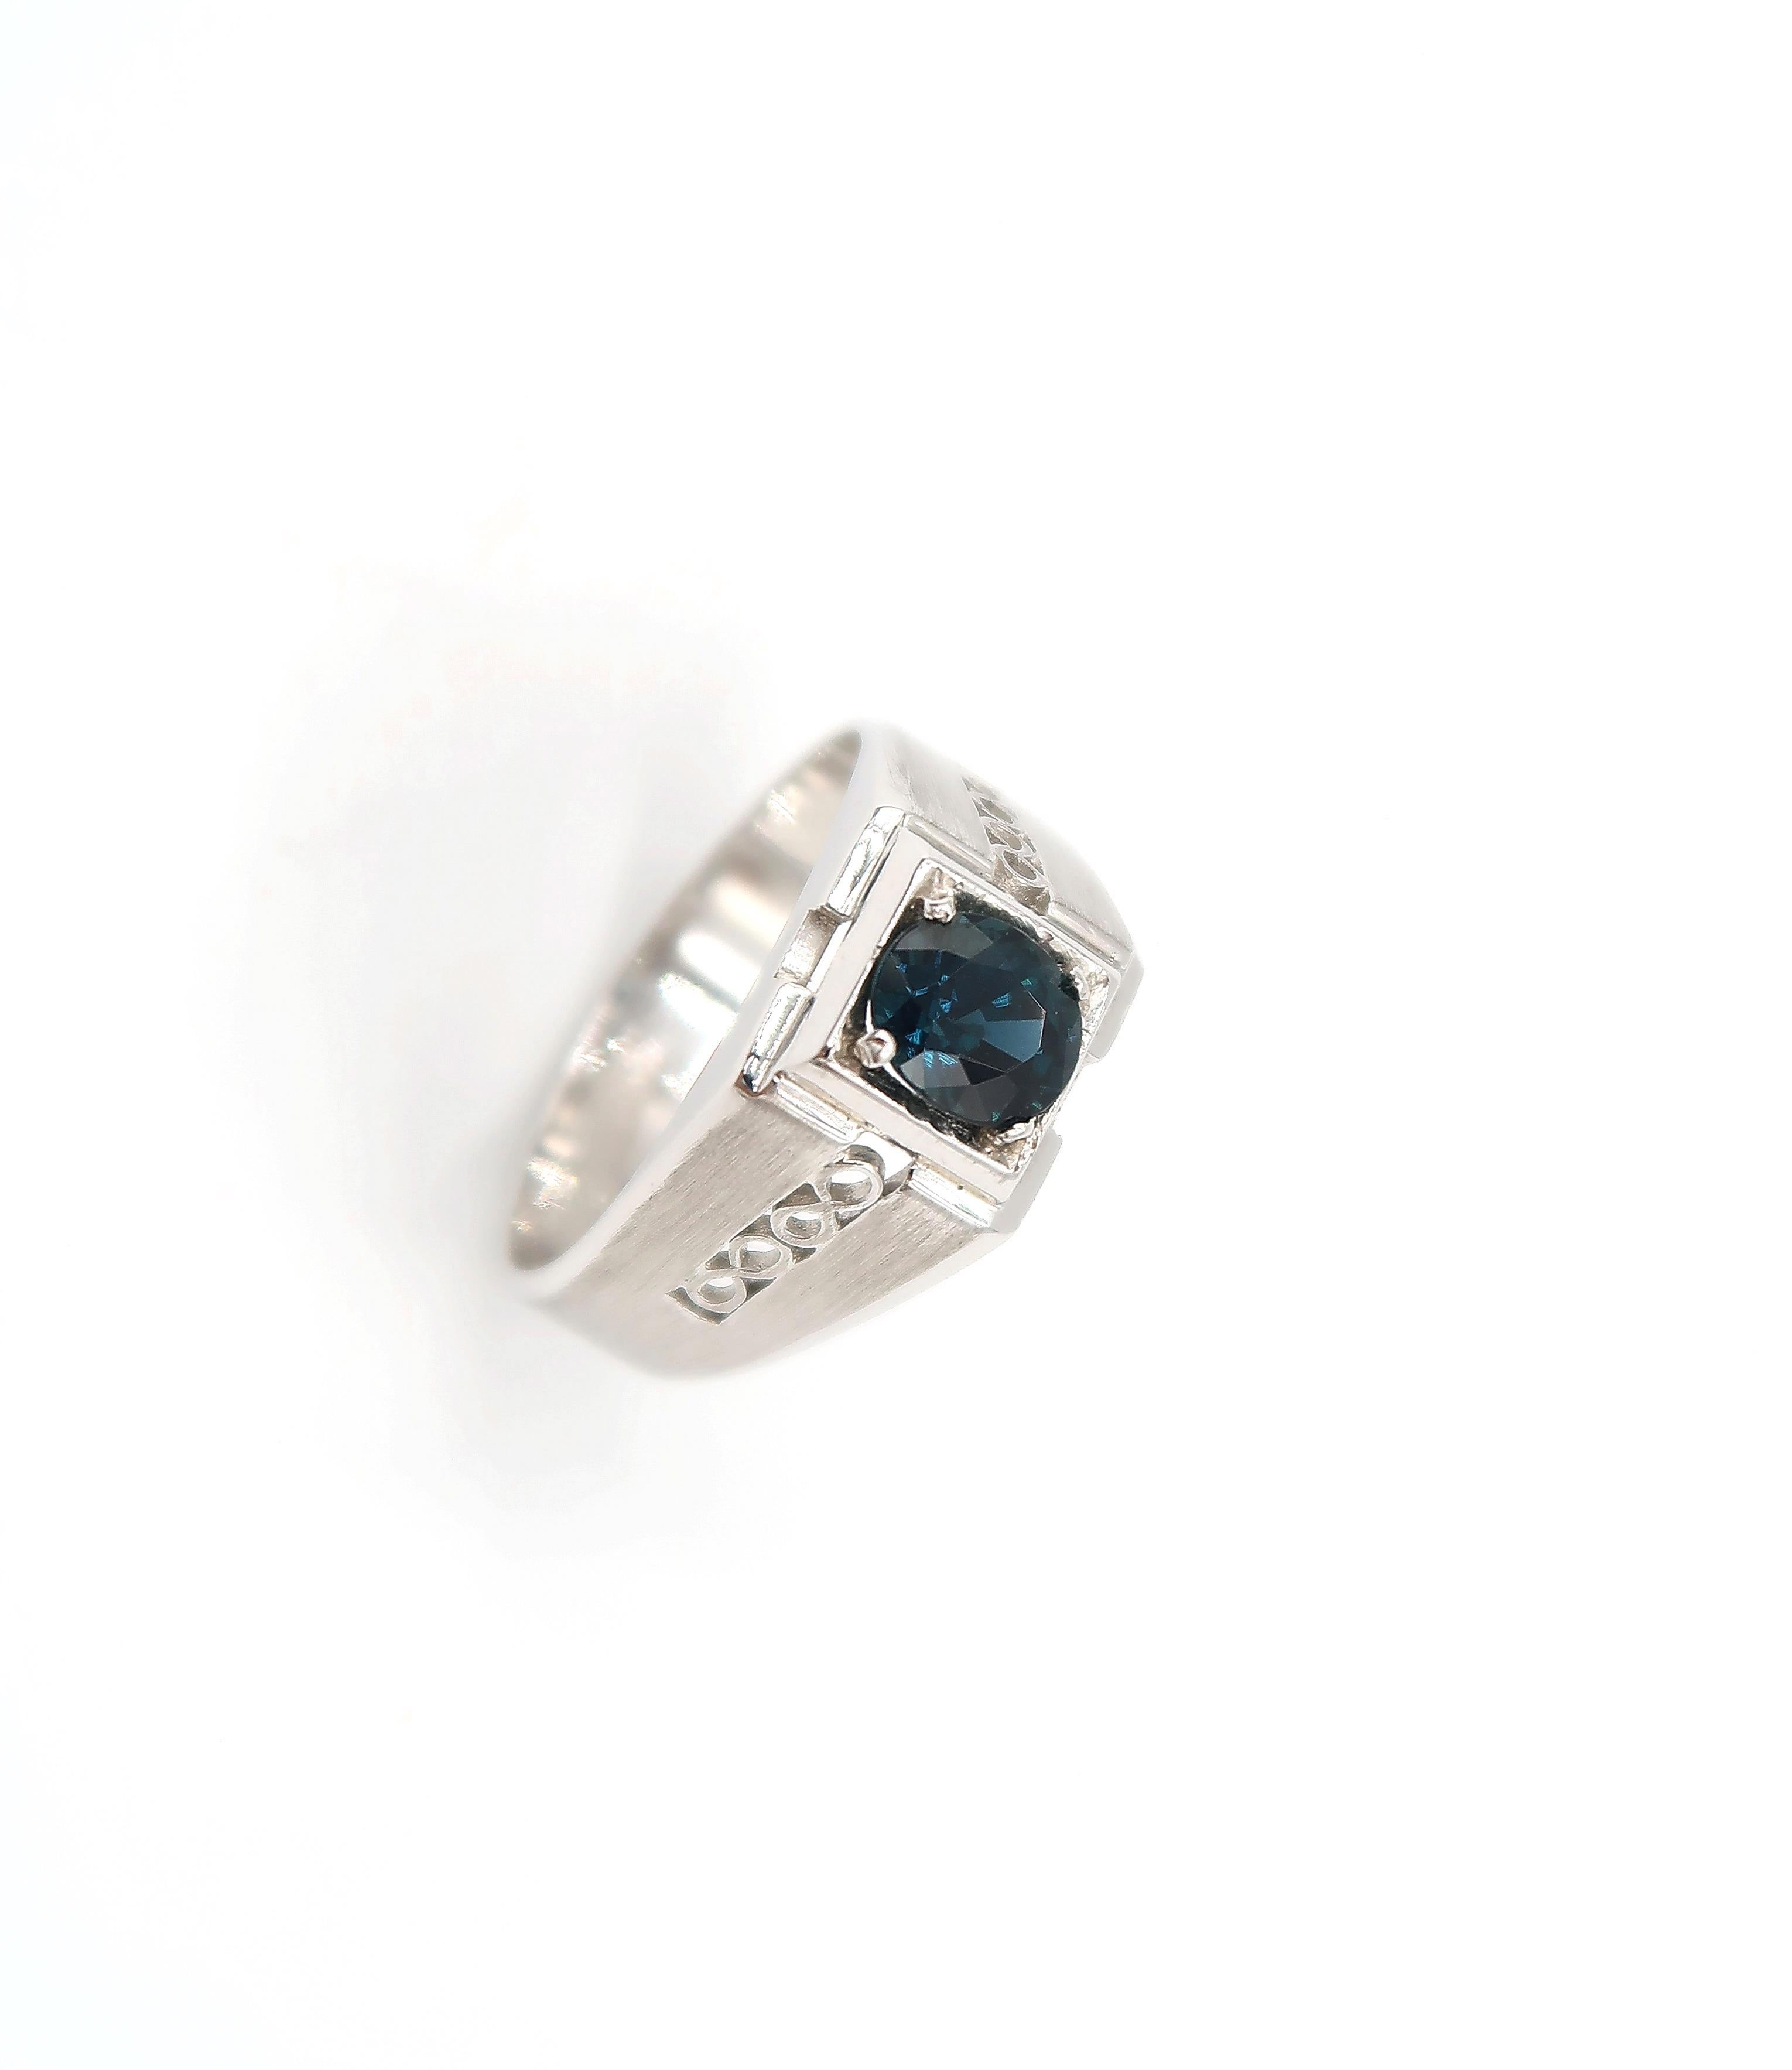 Sapphire Solitaire Brushed Platinum Men's Ring

Please let us know upon checkout should you wish to have the ring resized. 
Ring size: 55

Sapphire: 1.30ct.
Platinum: 8.0g.